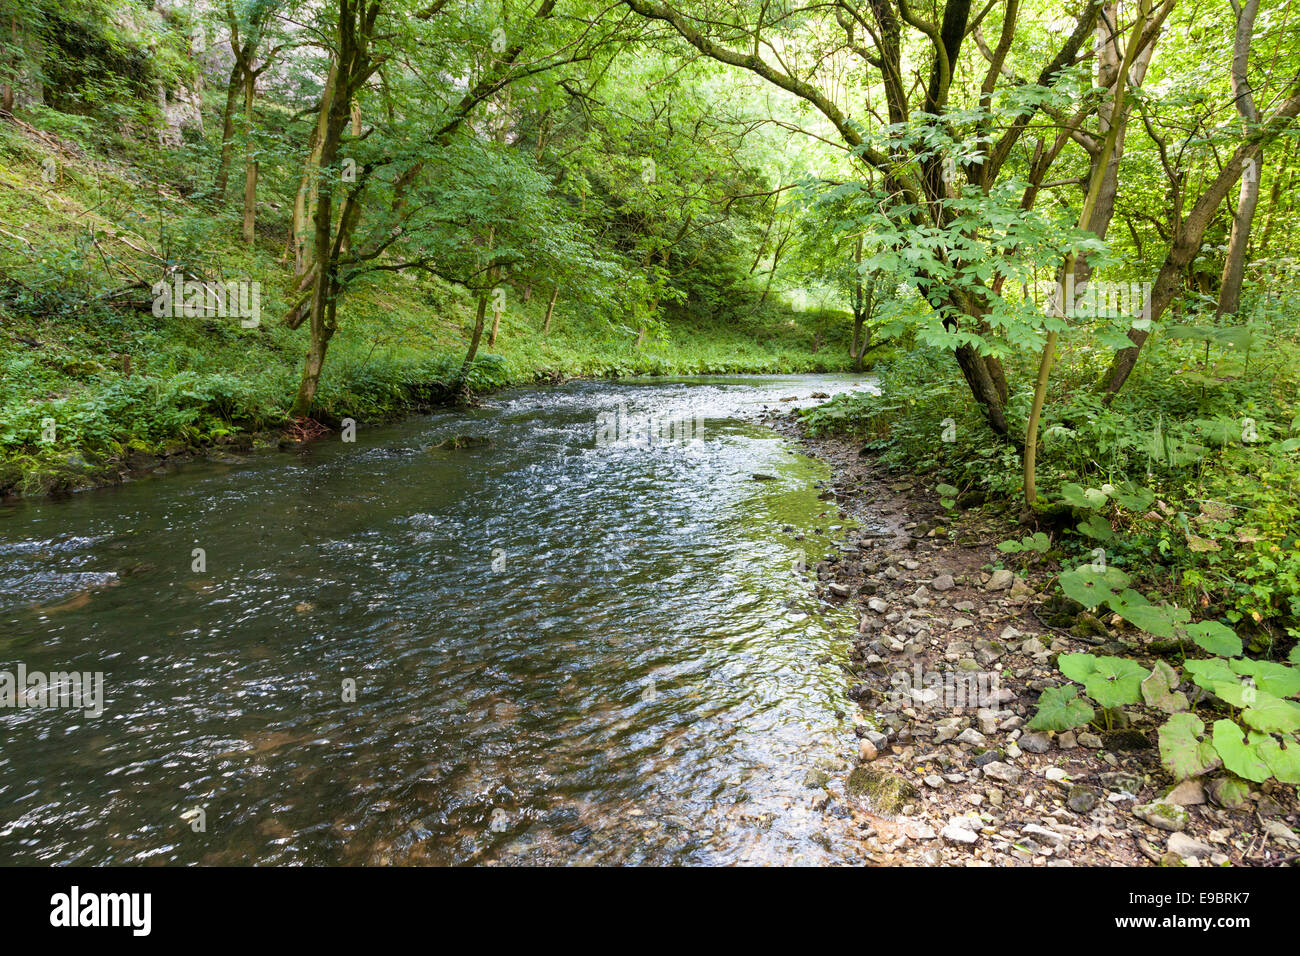 The River Wye passing through woodland trees in Miller's Dale, Derbyshire Dales, Peak District National Park, England, UK Stock Photo